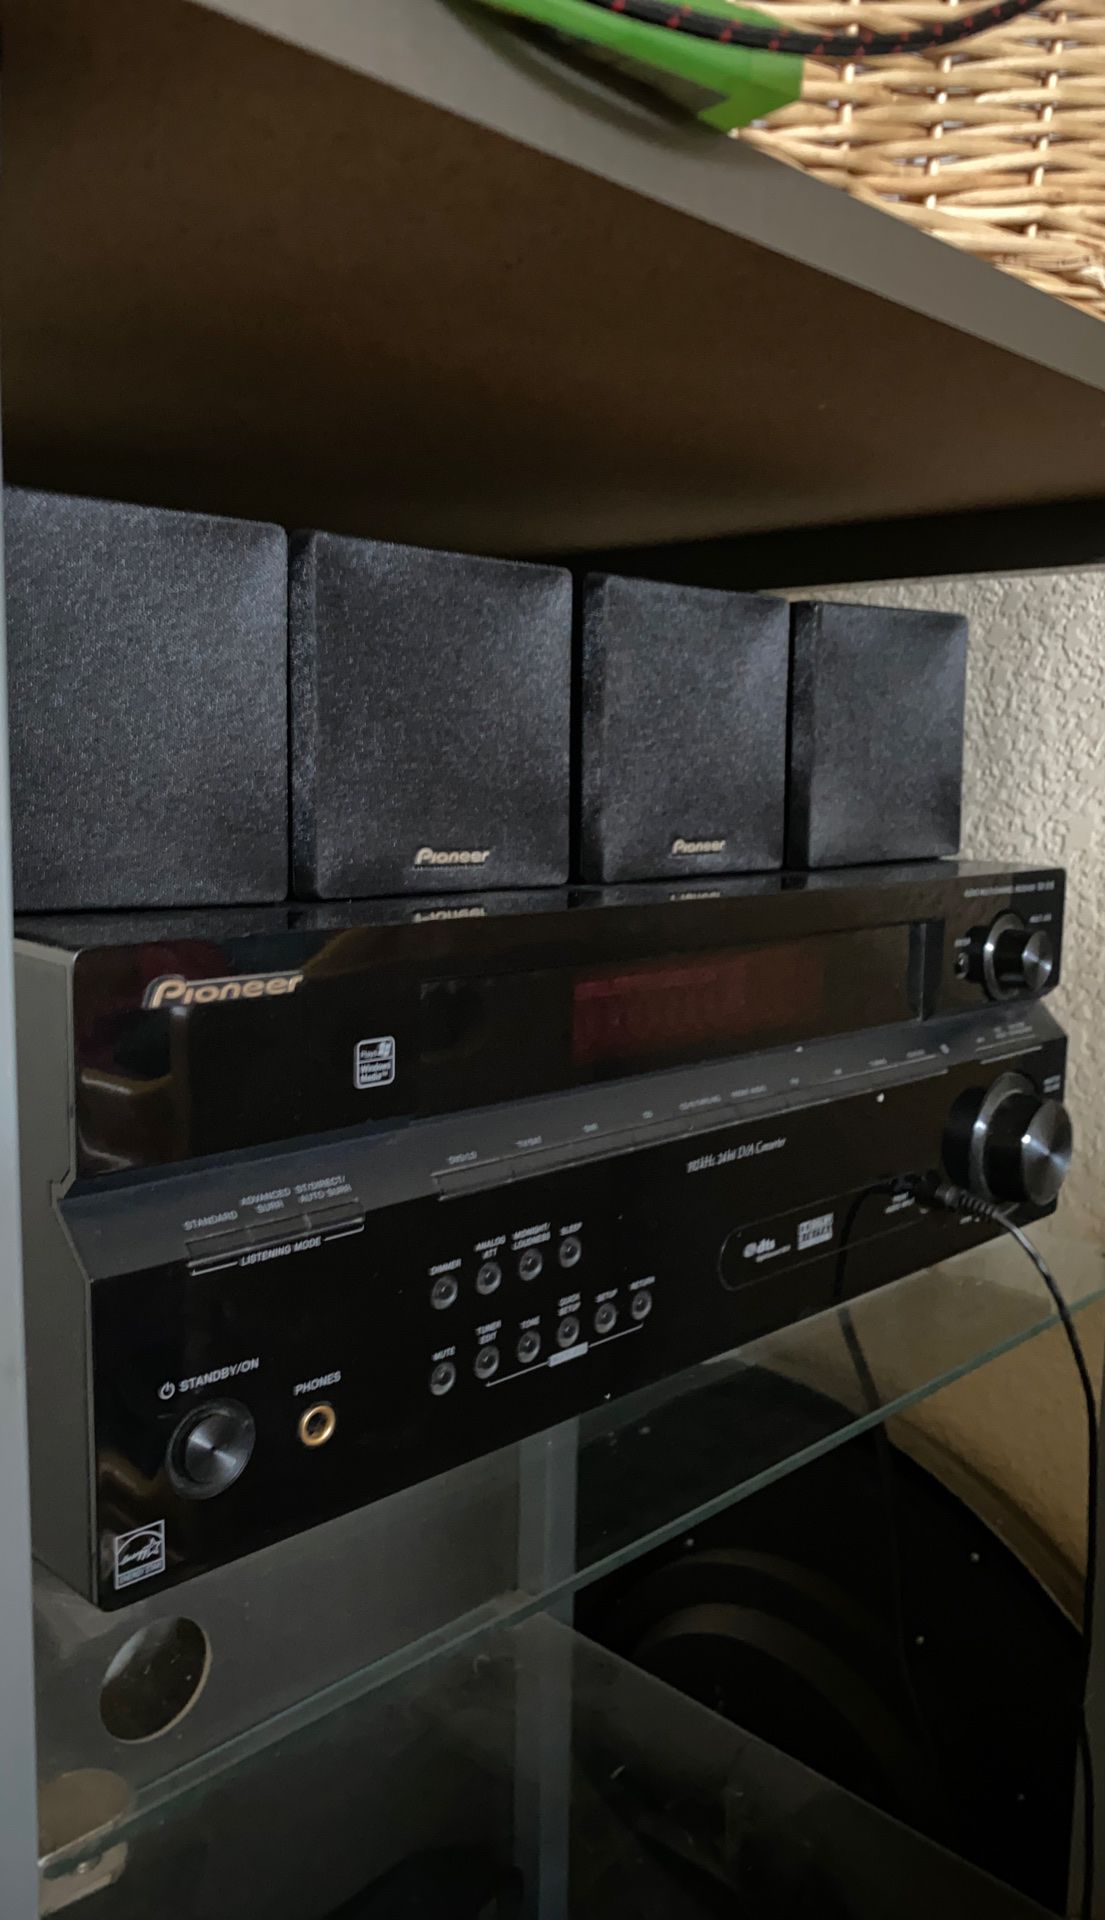 Pioneer home theater receiver system